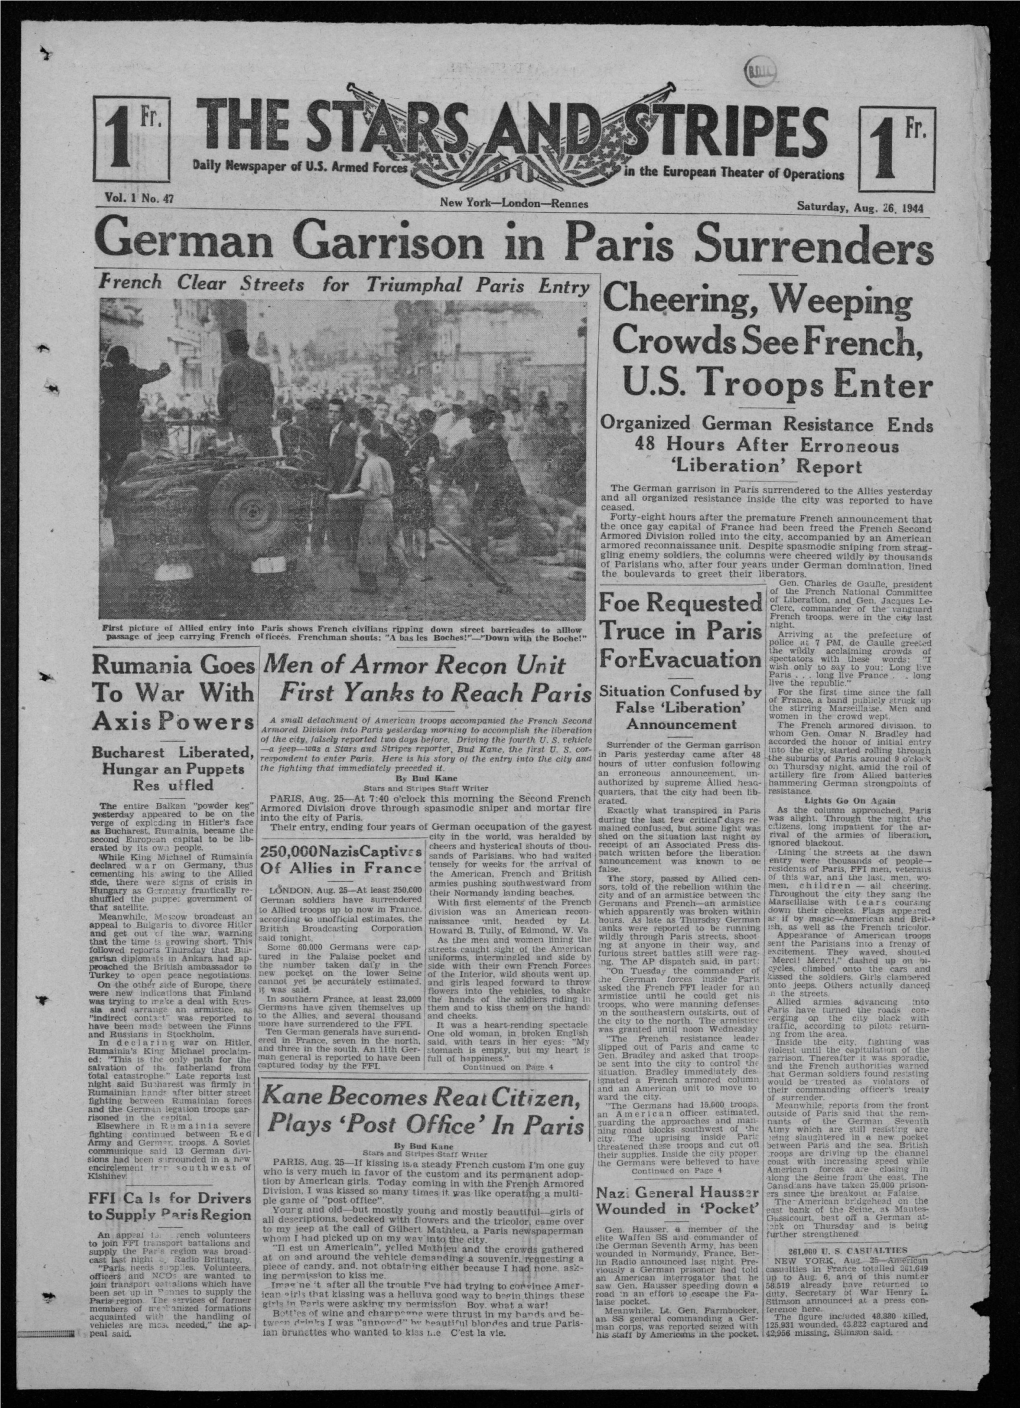 Man Garrison in Paris Surrenders French Clear Streets for Triumphal Paris Entry Cheering, Weeping Crowds See French, U.S